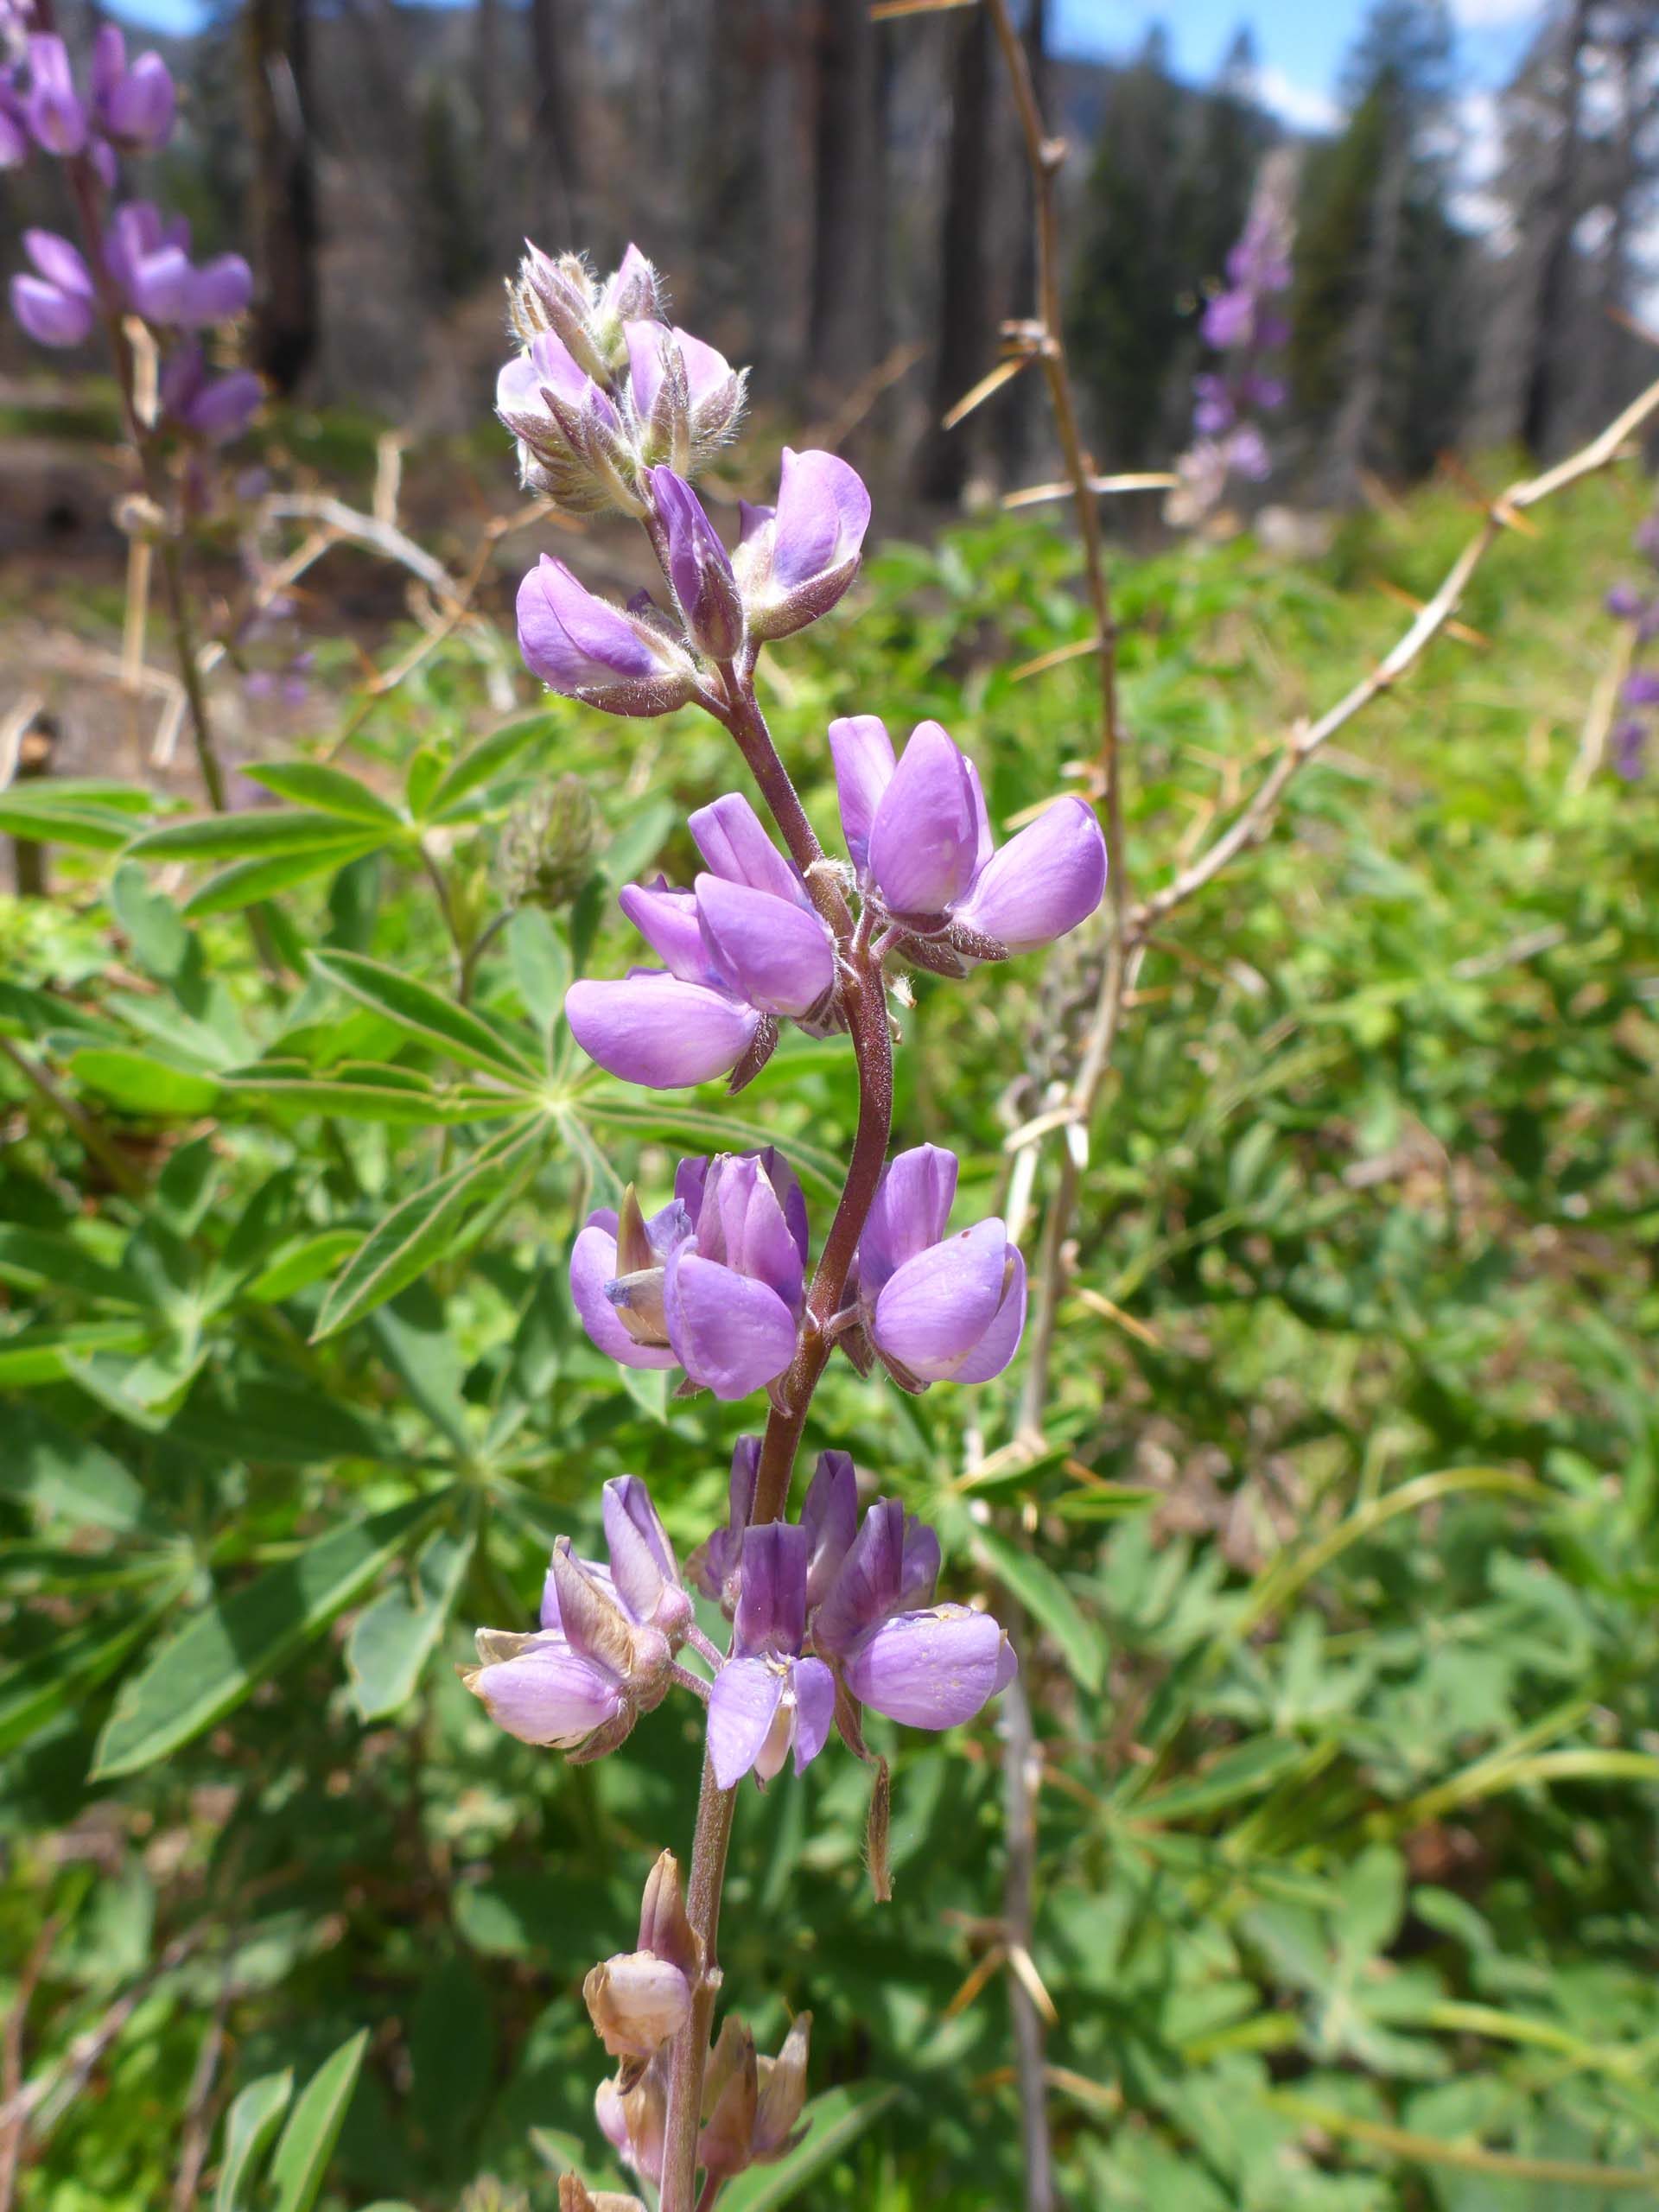 Broad-leaved lupine inflorescence. D. Burk.